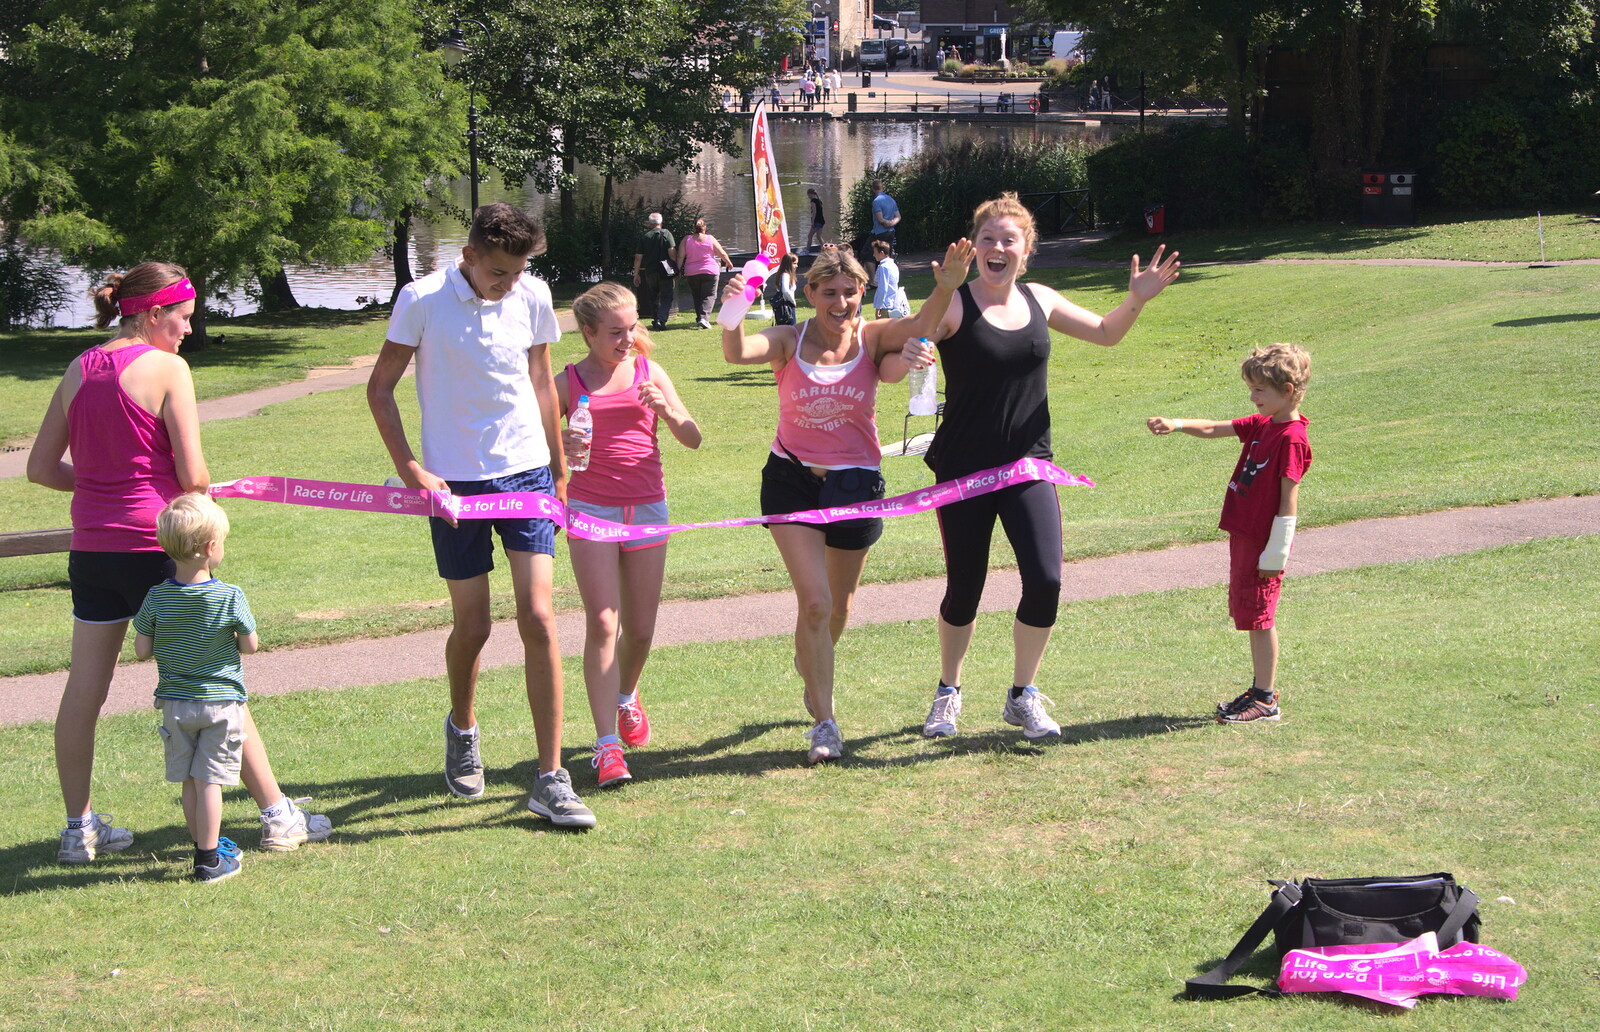 More runners finish from A Race For Life, The Park, Diss, Norfolk - 16th August 2015